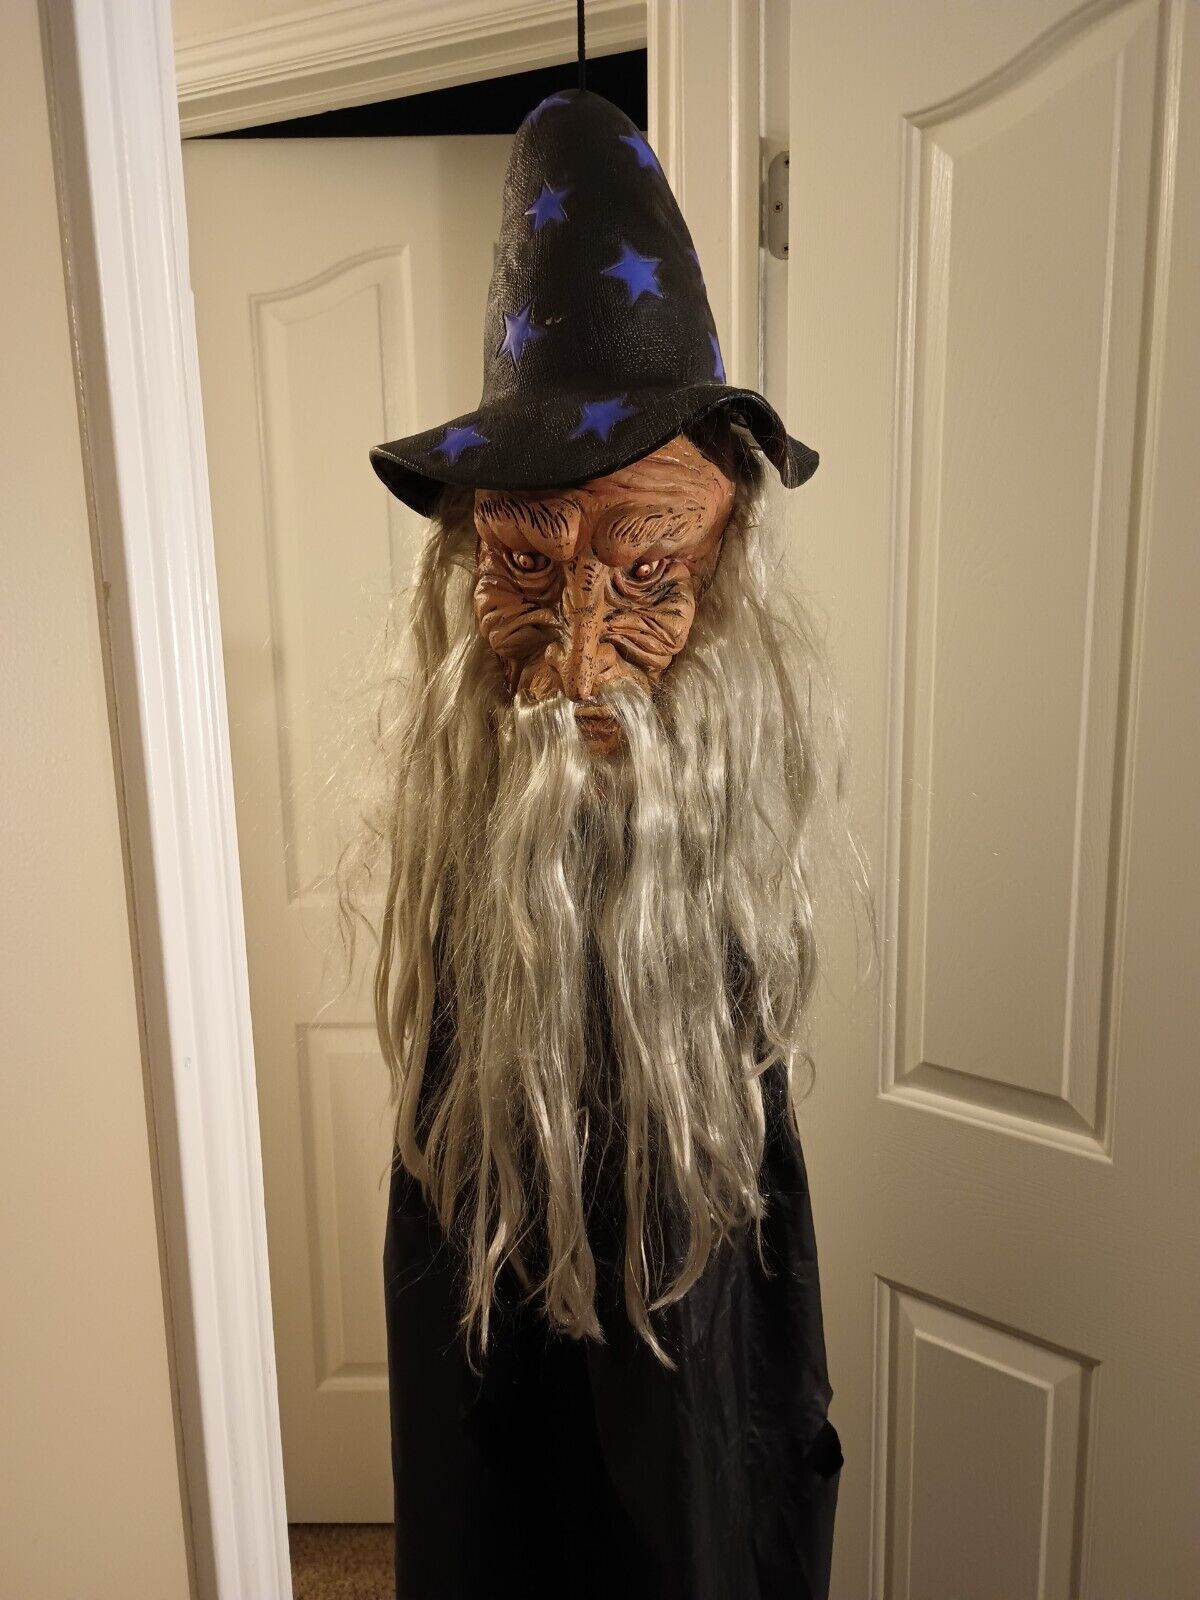 Amusement Park Merlin Wizard with Cape Figure 6ft Tall